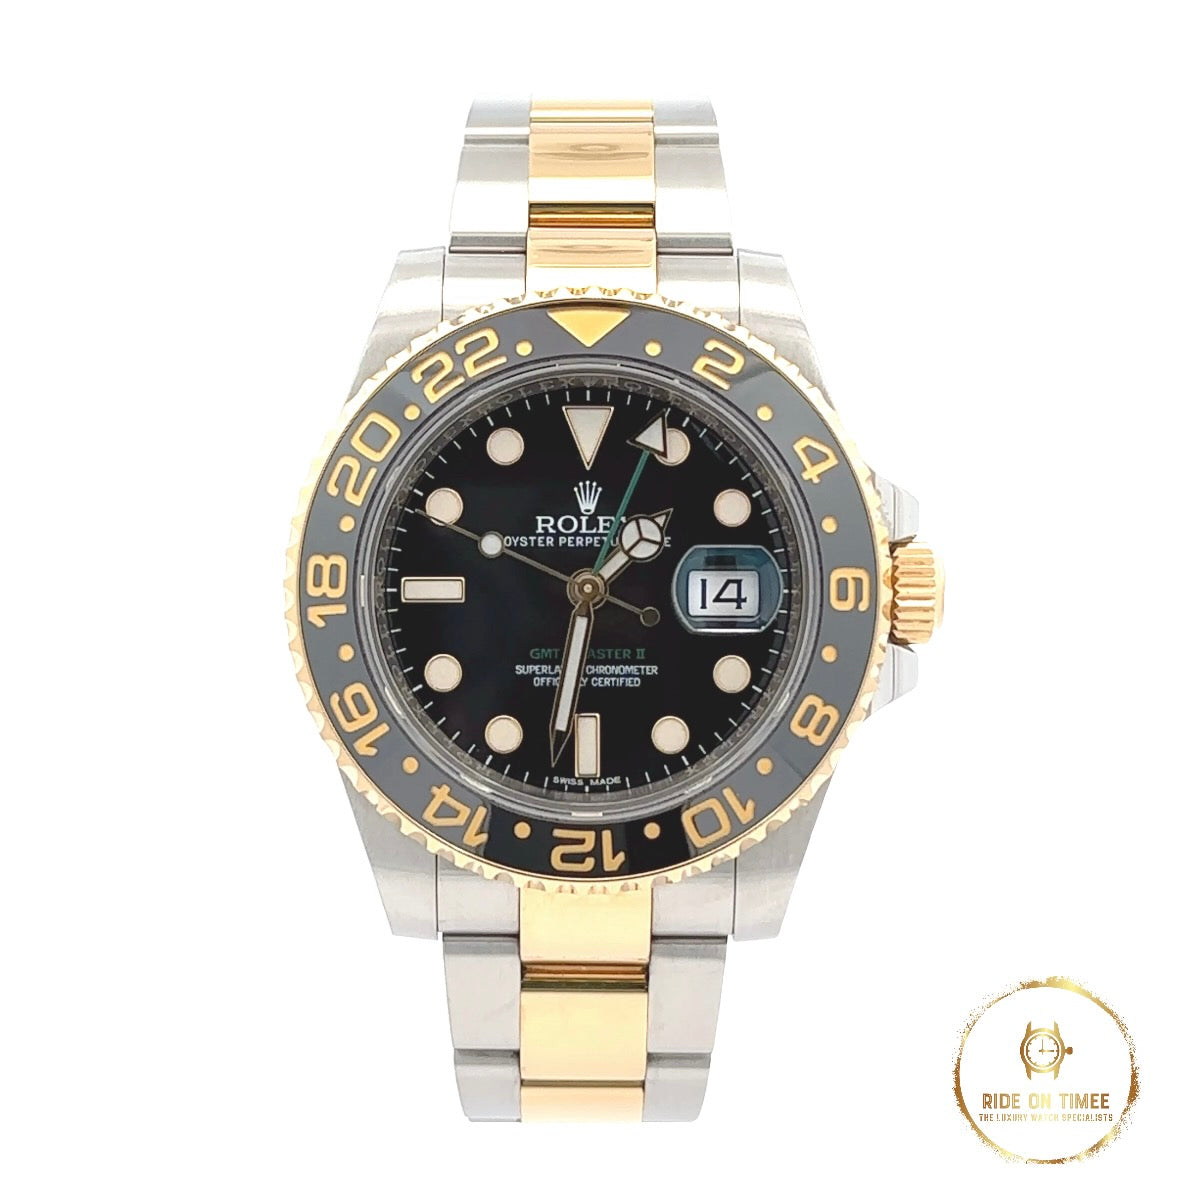 Rolex GMT Master ii ‘116713LN’ - Ride On Timee